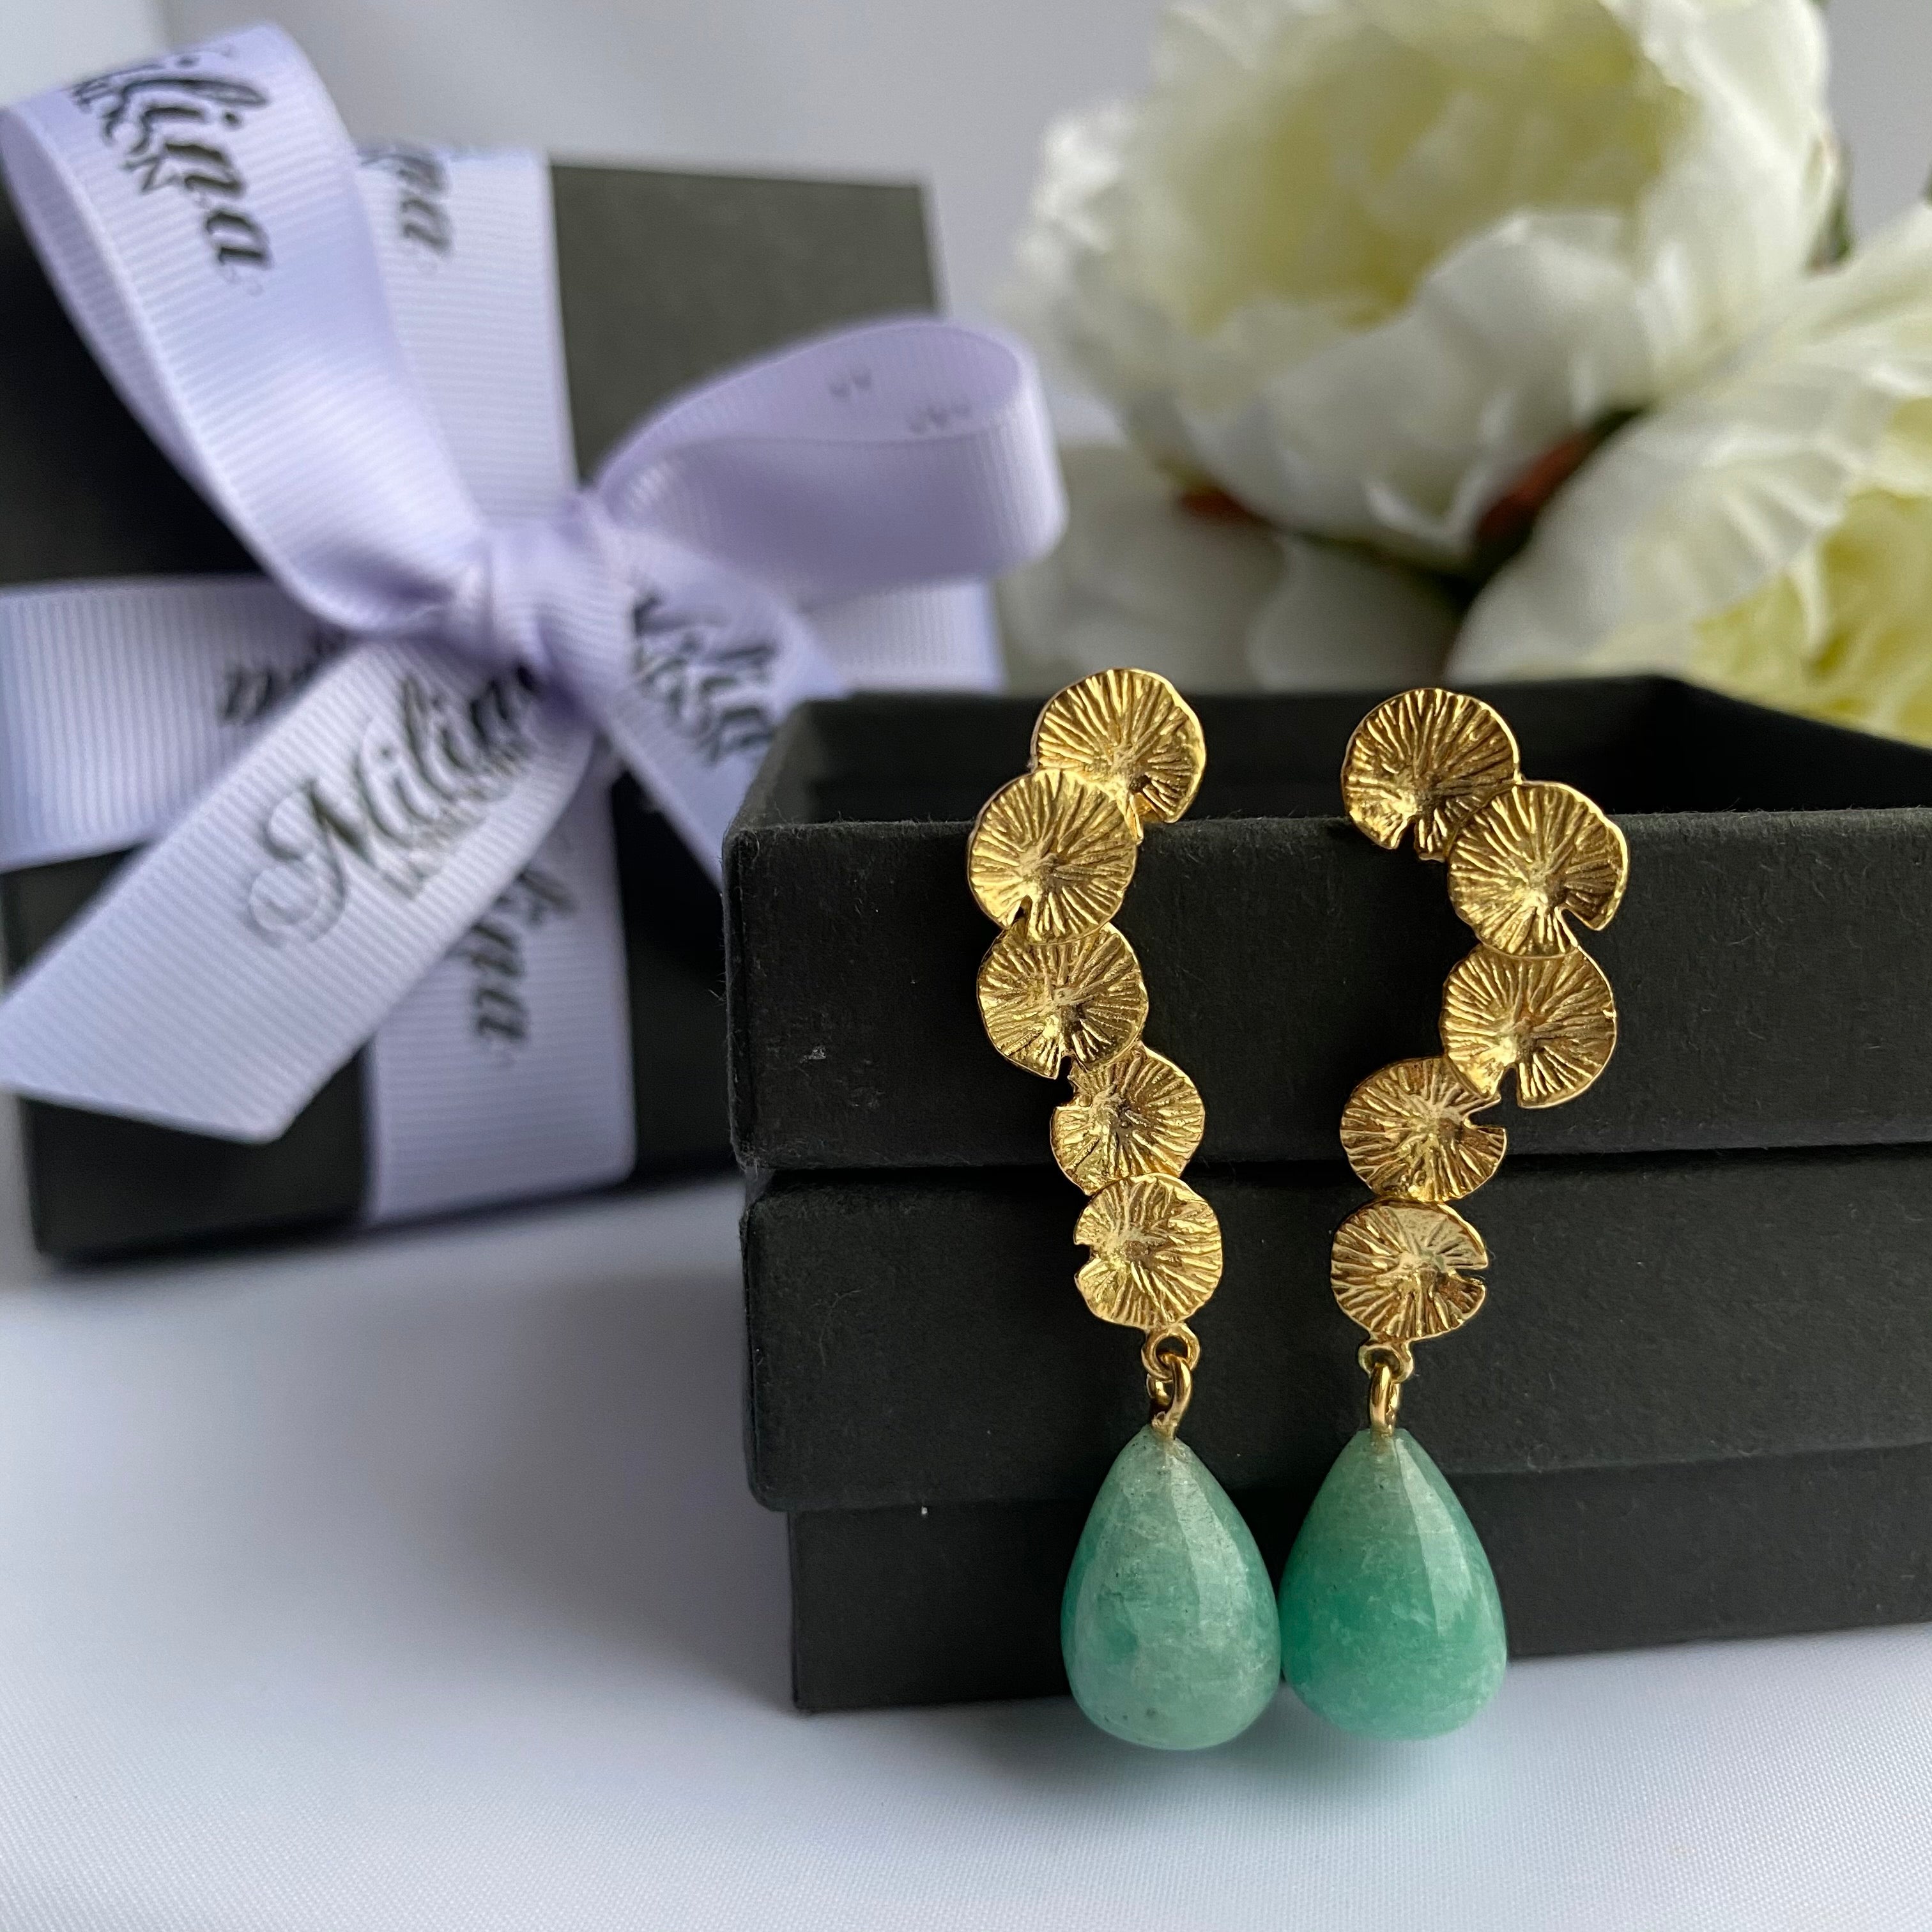 Lily Pad Earrings in Gold Plated Sterling Silver with a Amazonite Stone Drop